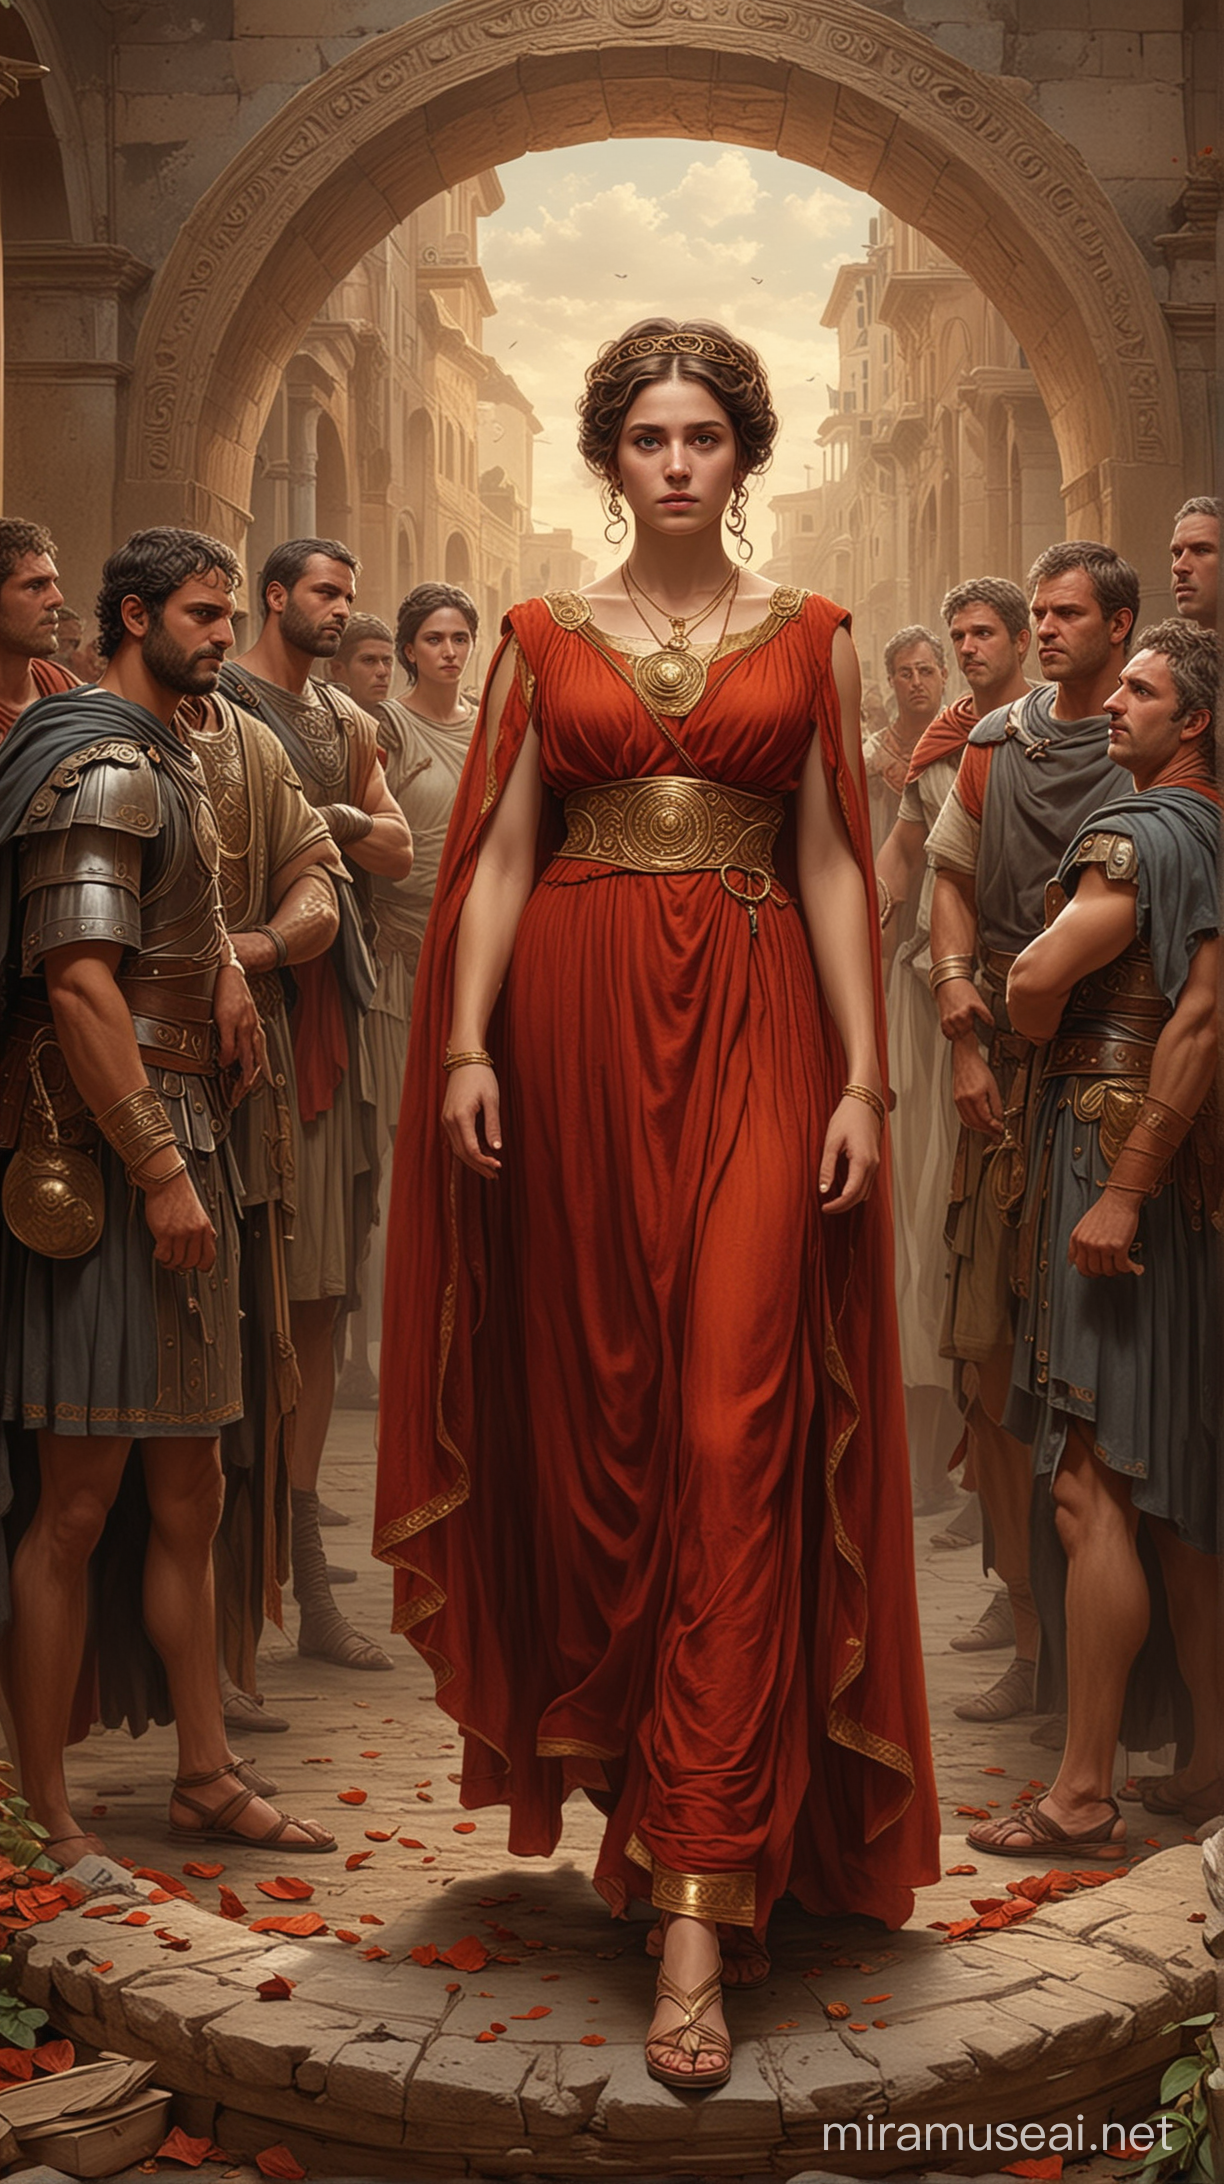 Regal Julia Surrounded by Influential Men in Ancient Rome